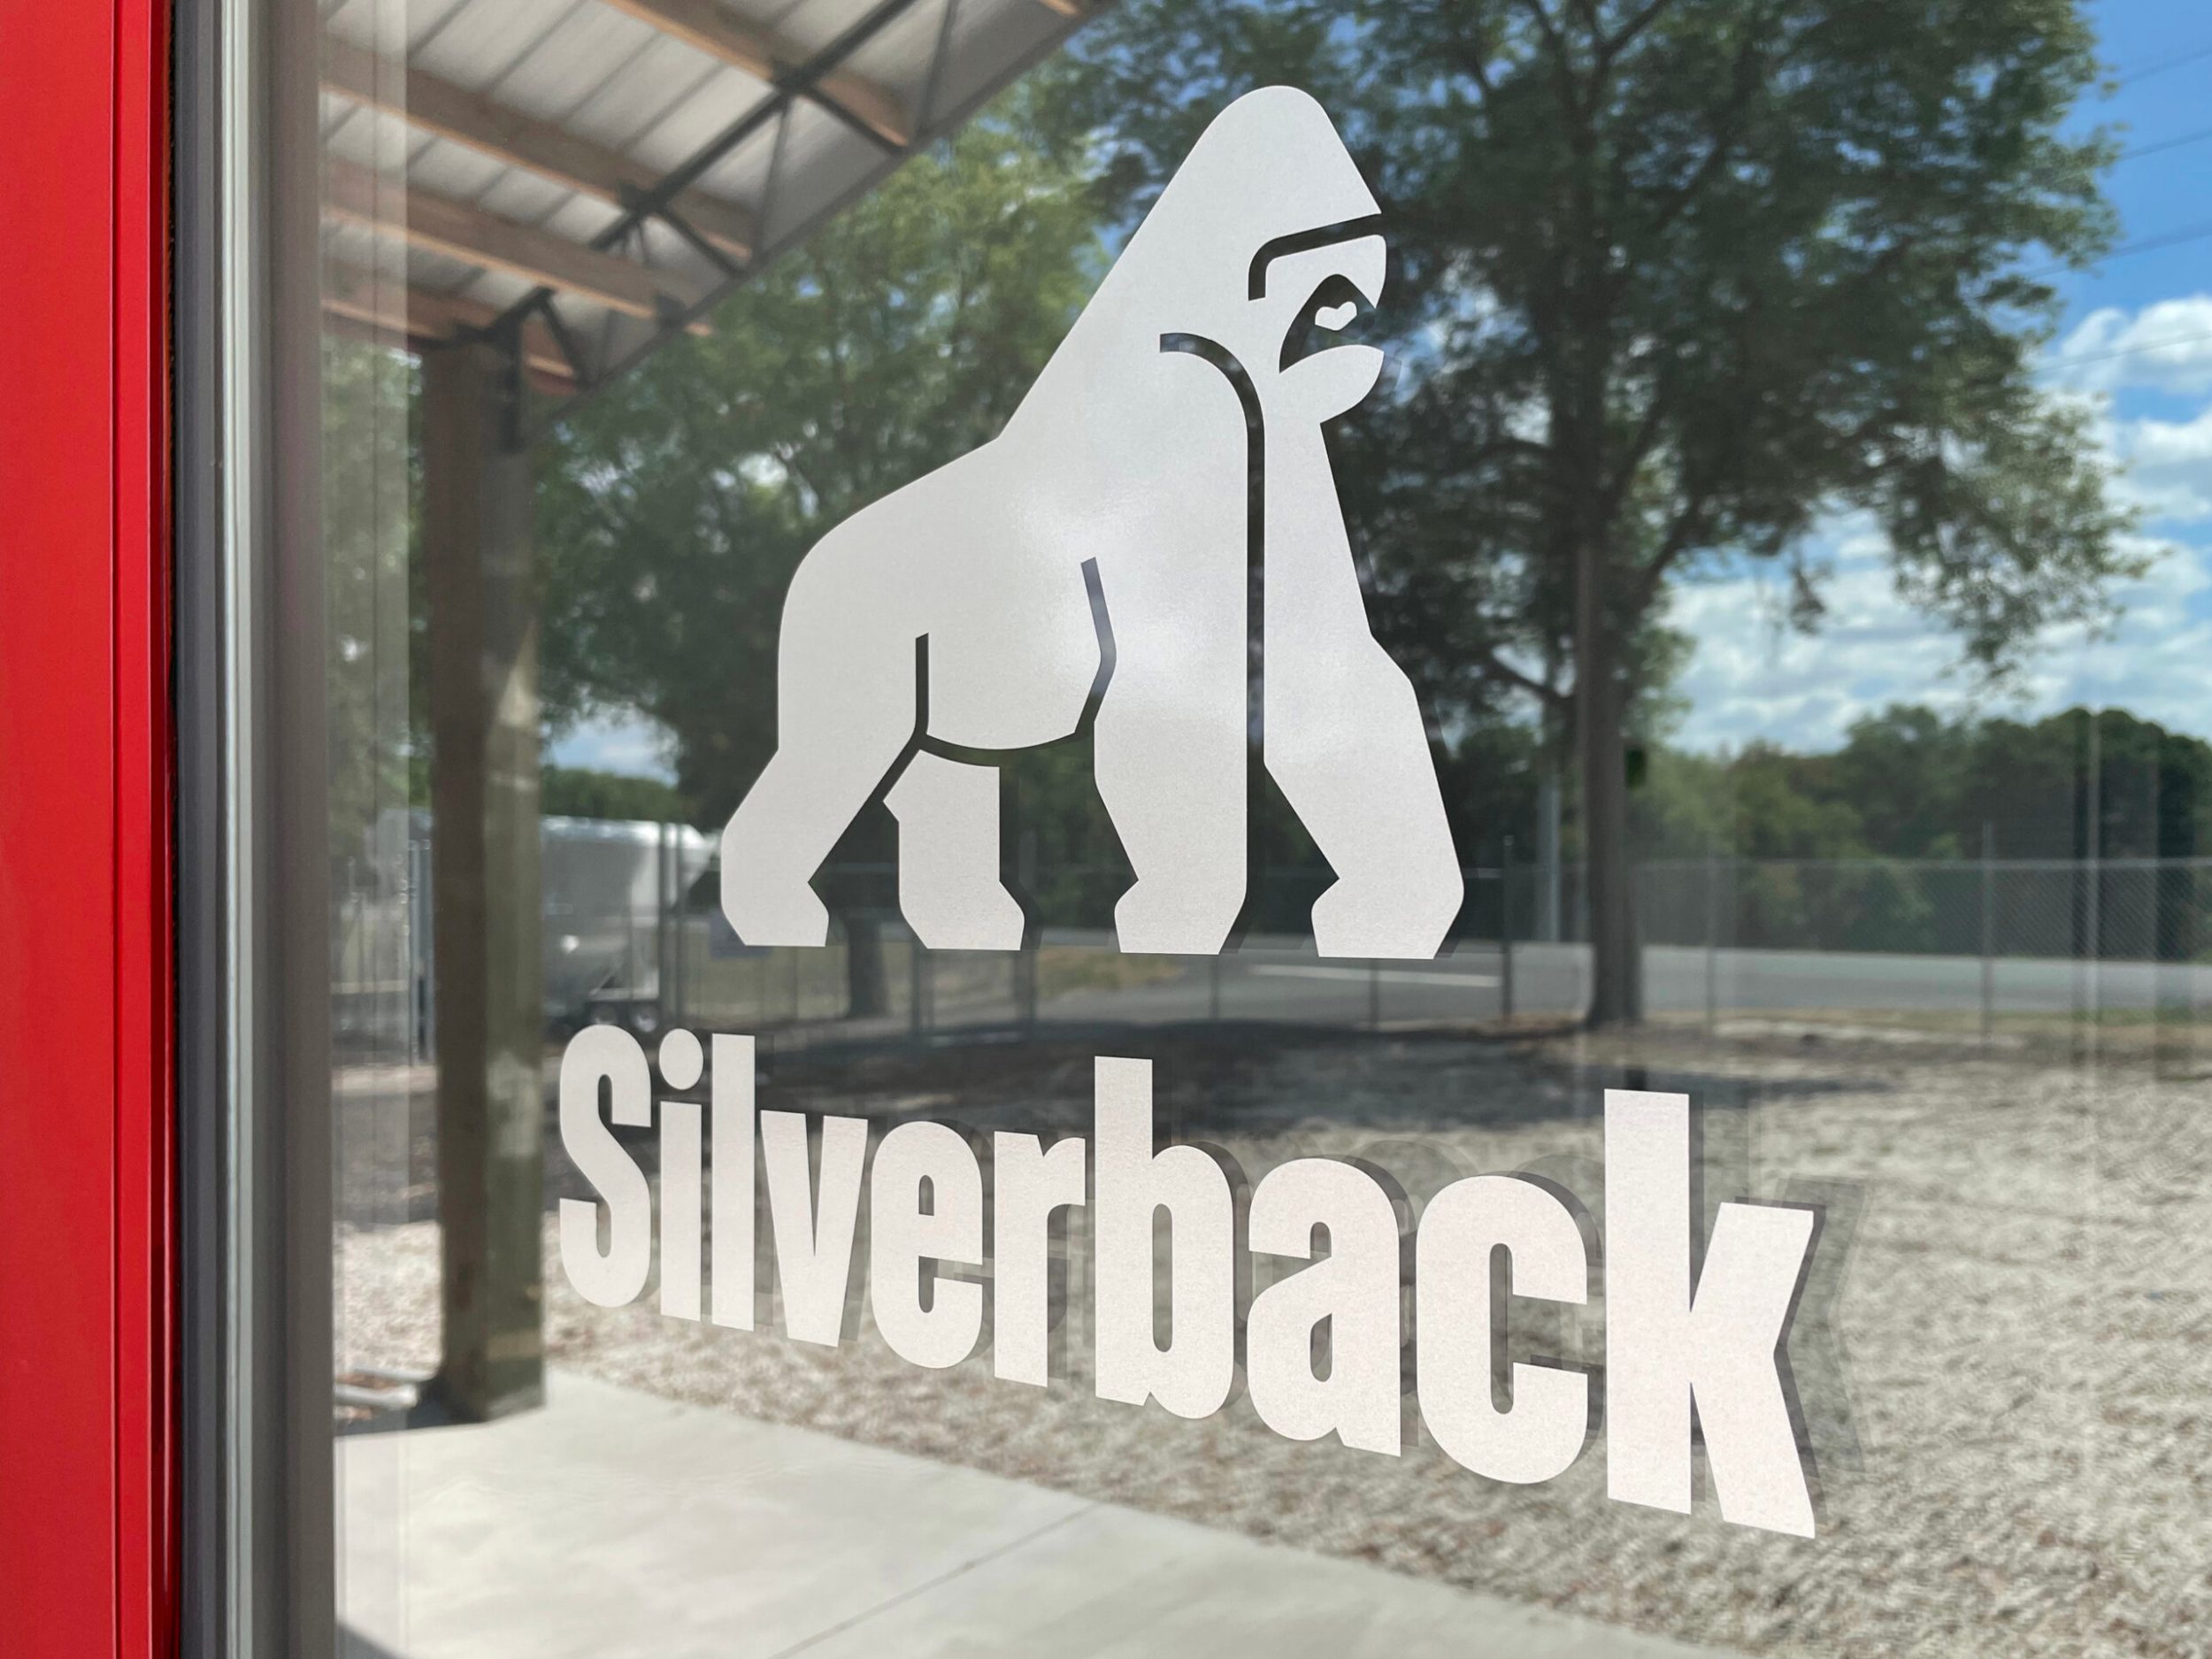 Commercial window decal; 'Mack' Silverback Concrete.